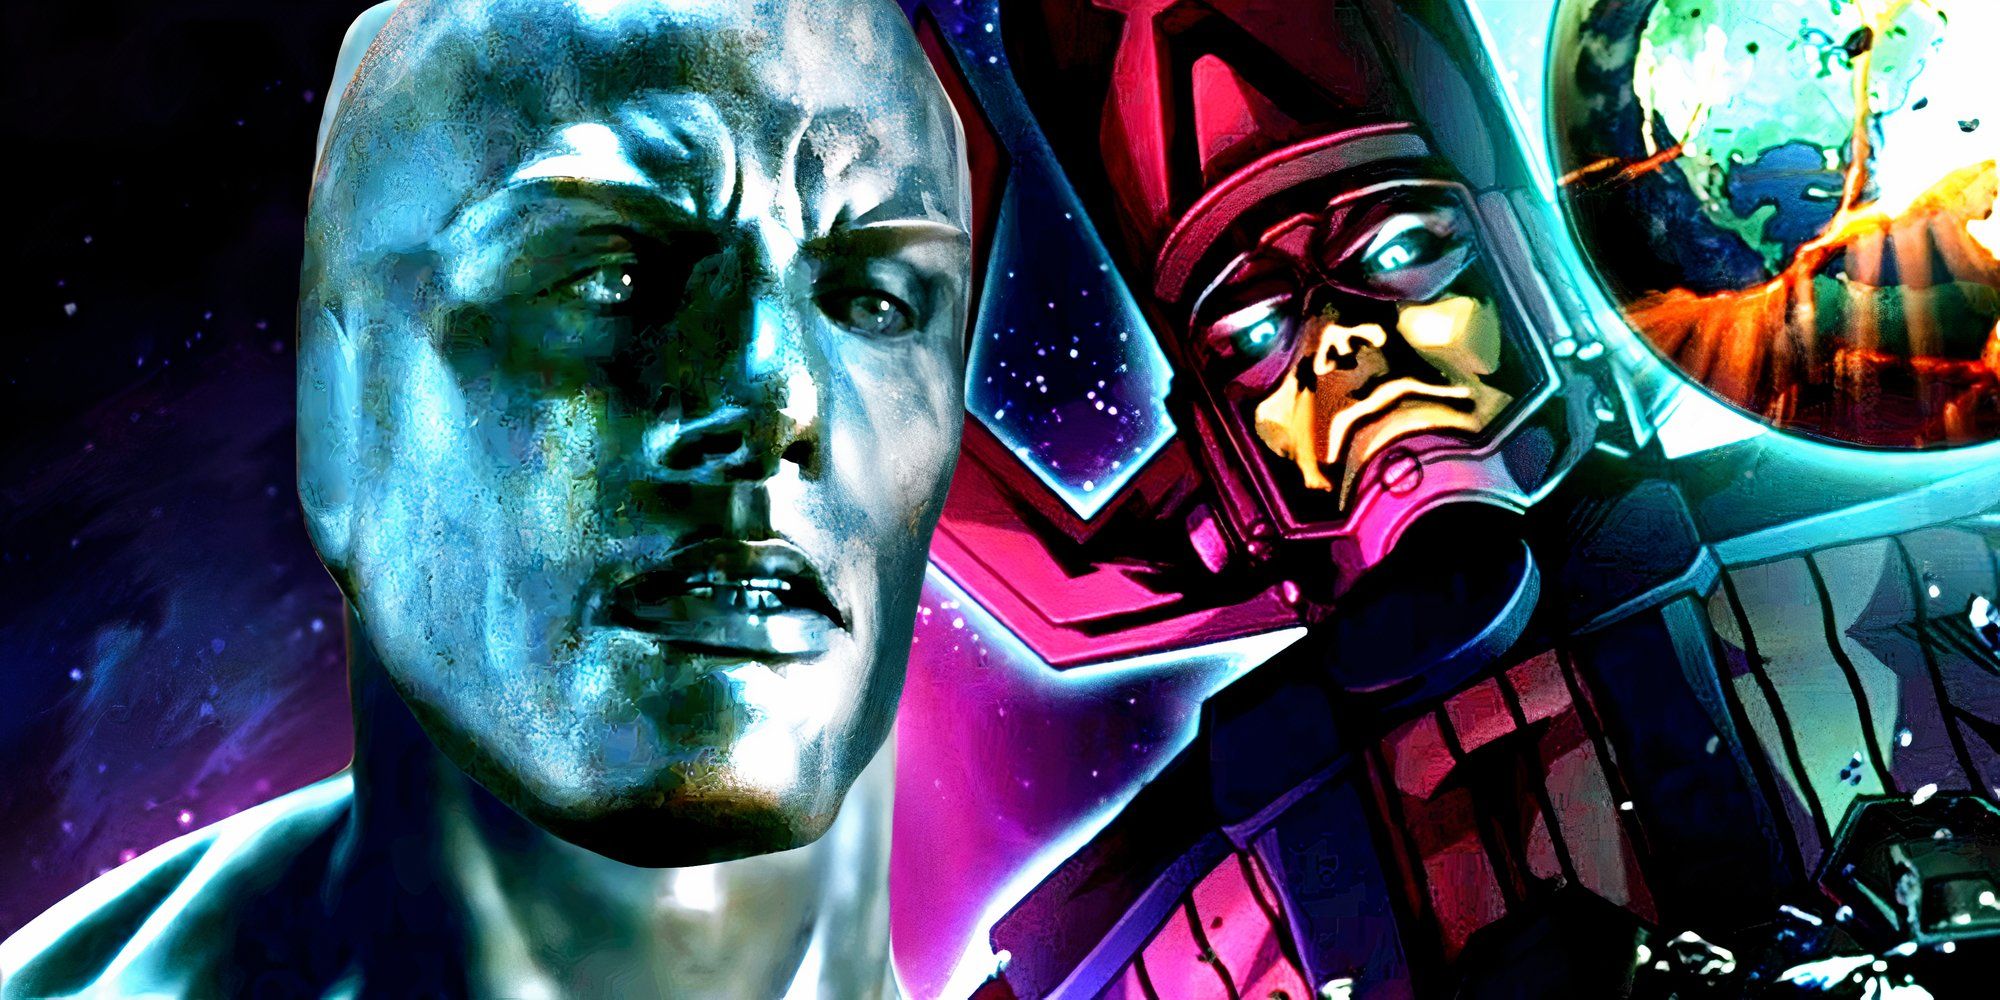 Silver Surfer in the 2007 Fantastic Four Movie and Galactus Eats Planets in Marvel Comics